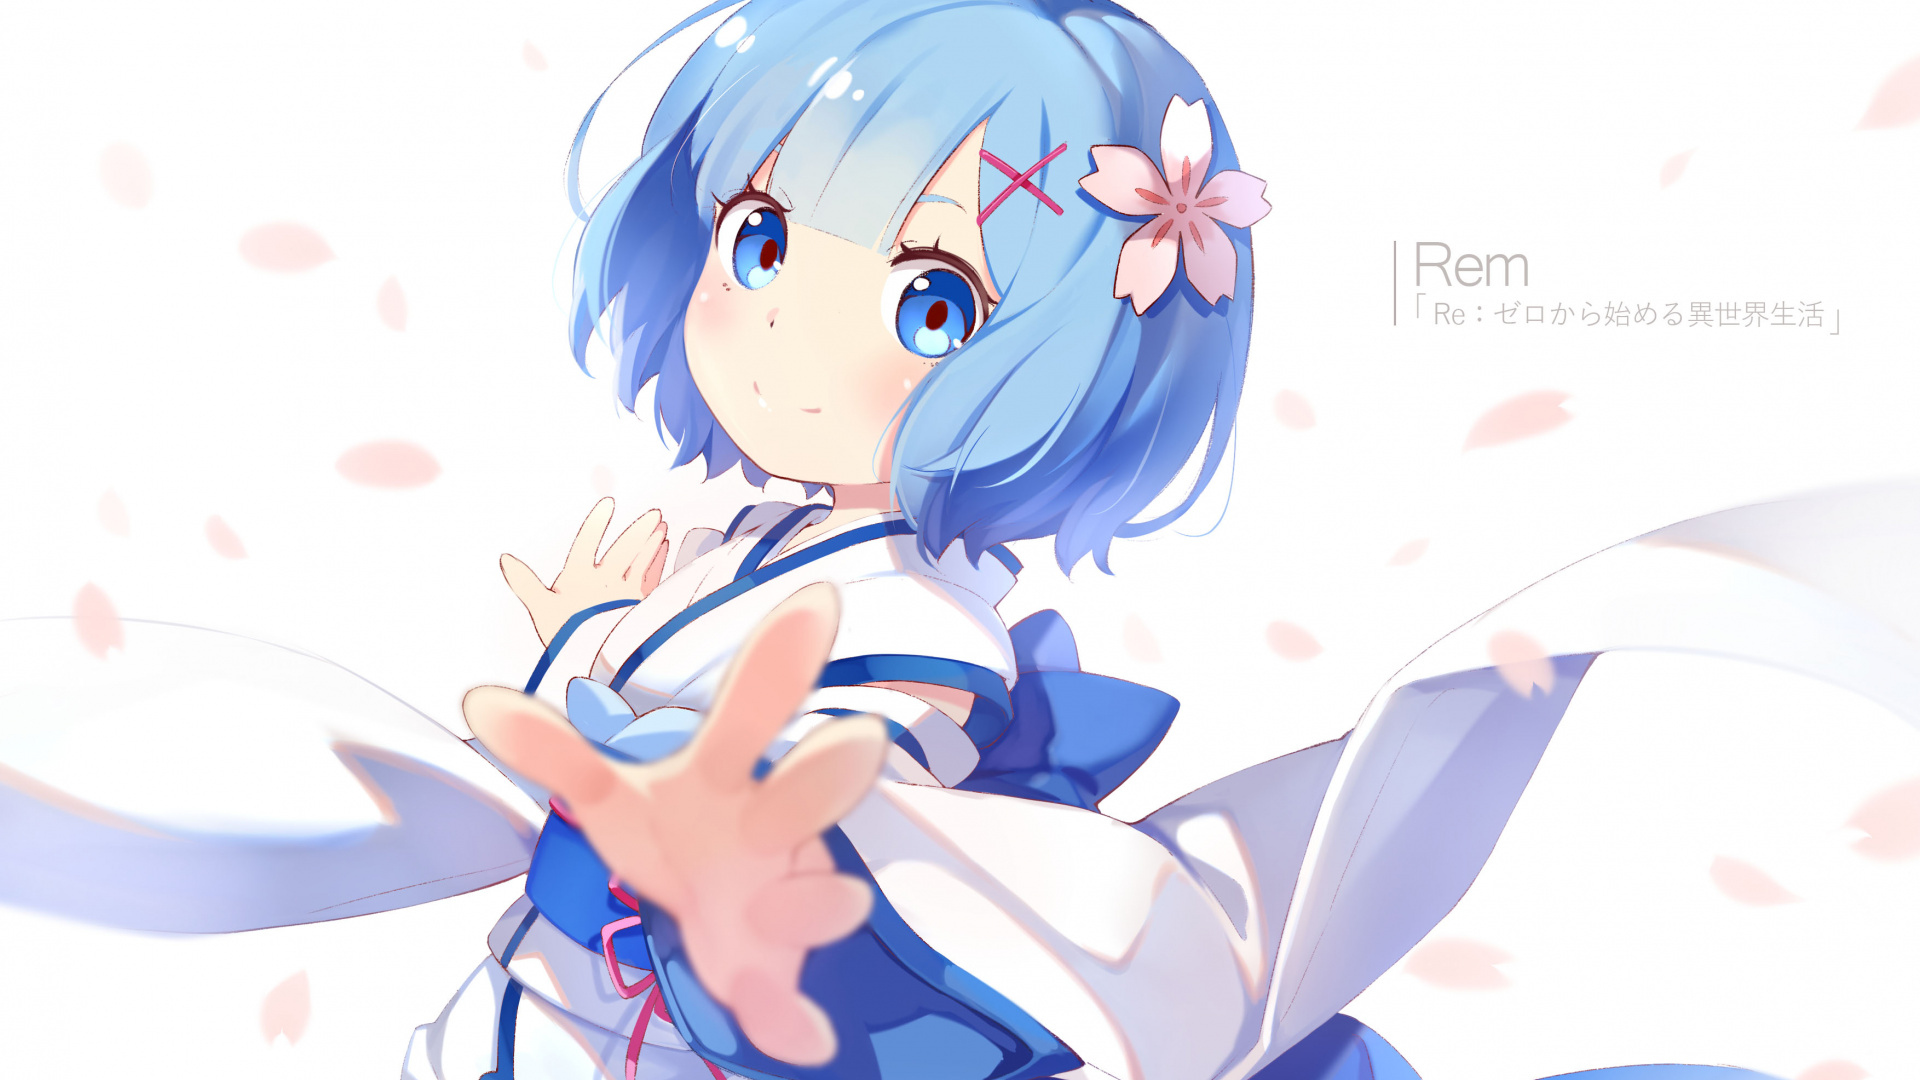 Fille en Robe Bleue Personnage Anime. Wallpaper in 1920x1080 Resolution